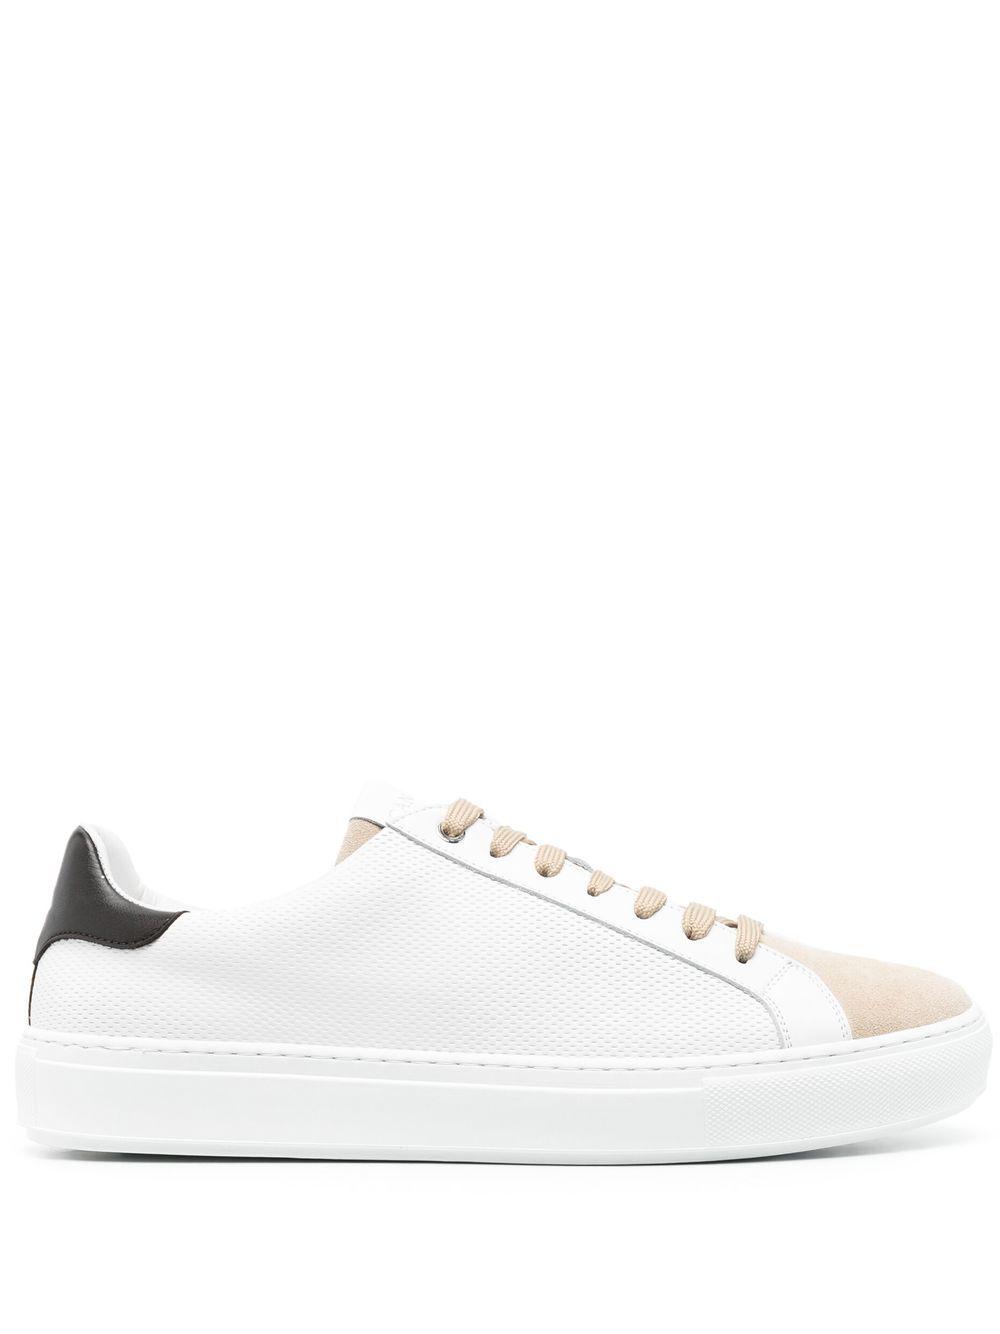 Canali Low-top Perforated Sneakers in White for Men | Lyst